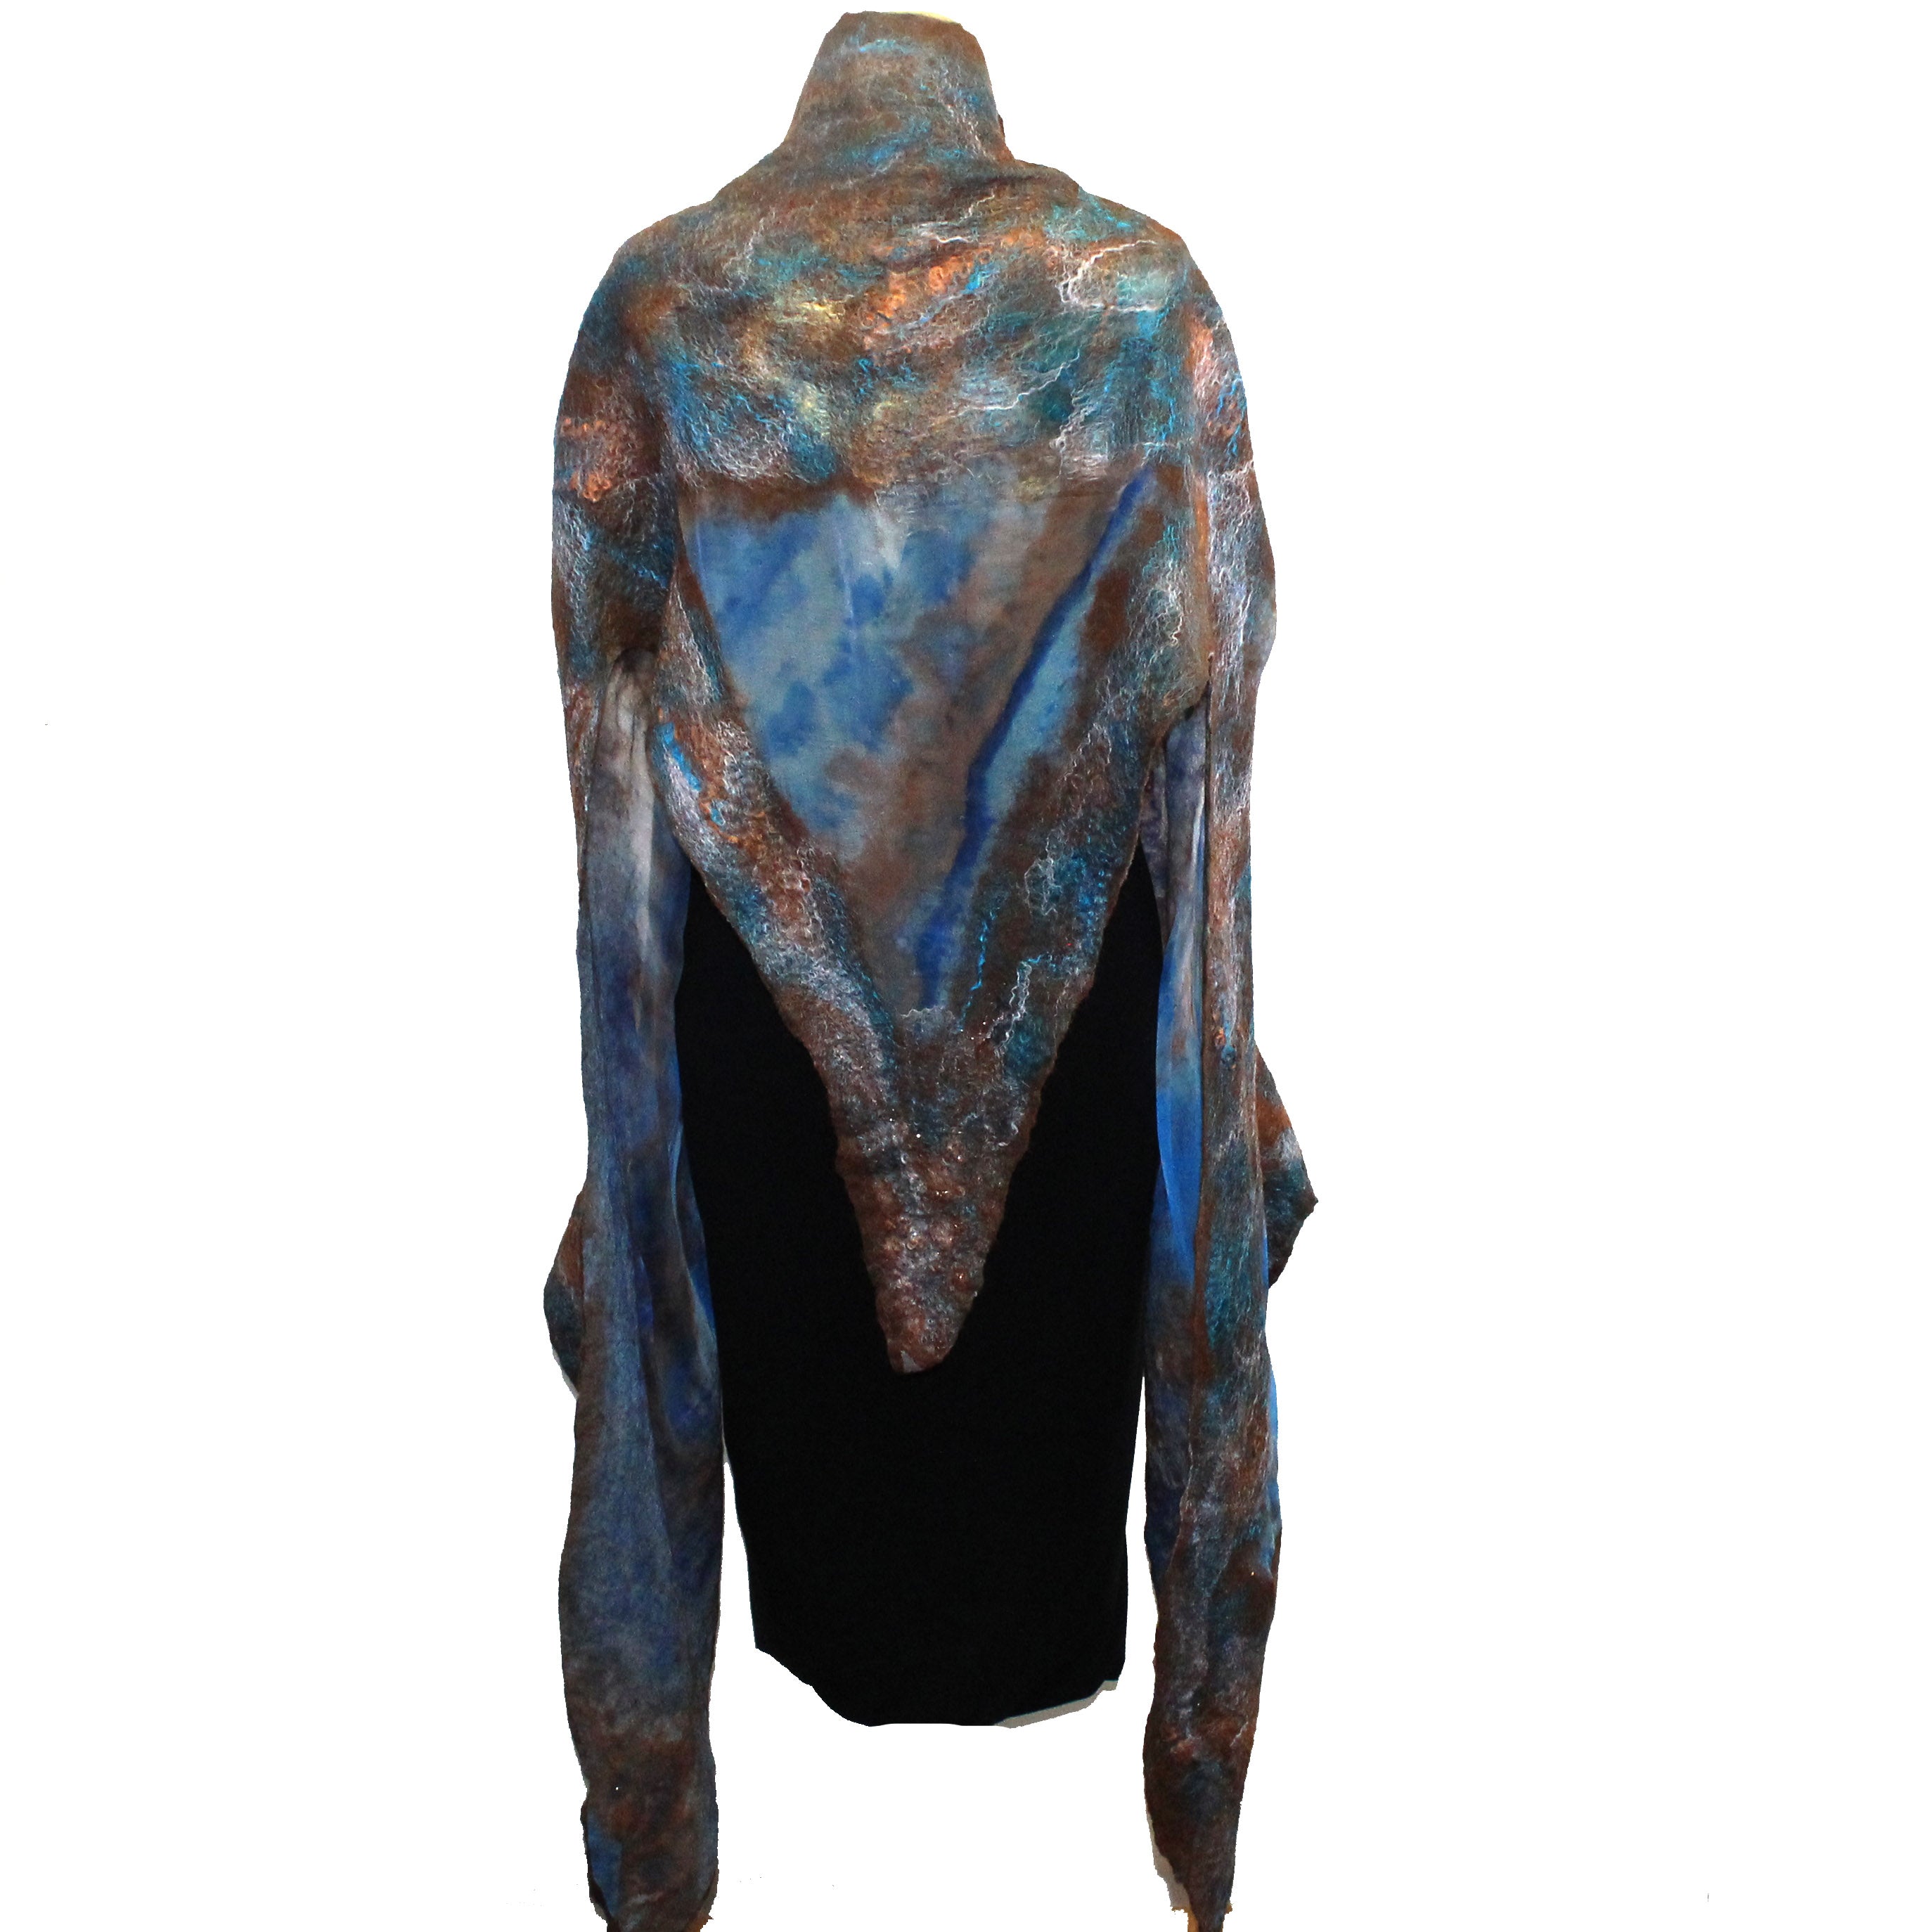 Enchanted Fibers Winged Cape, Reversible, Brown/Copper/Turquoise/Blue, OS